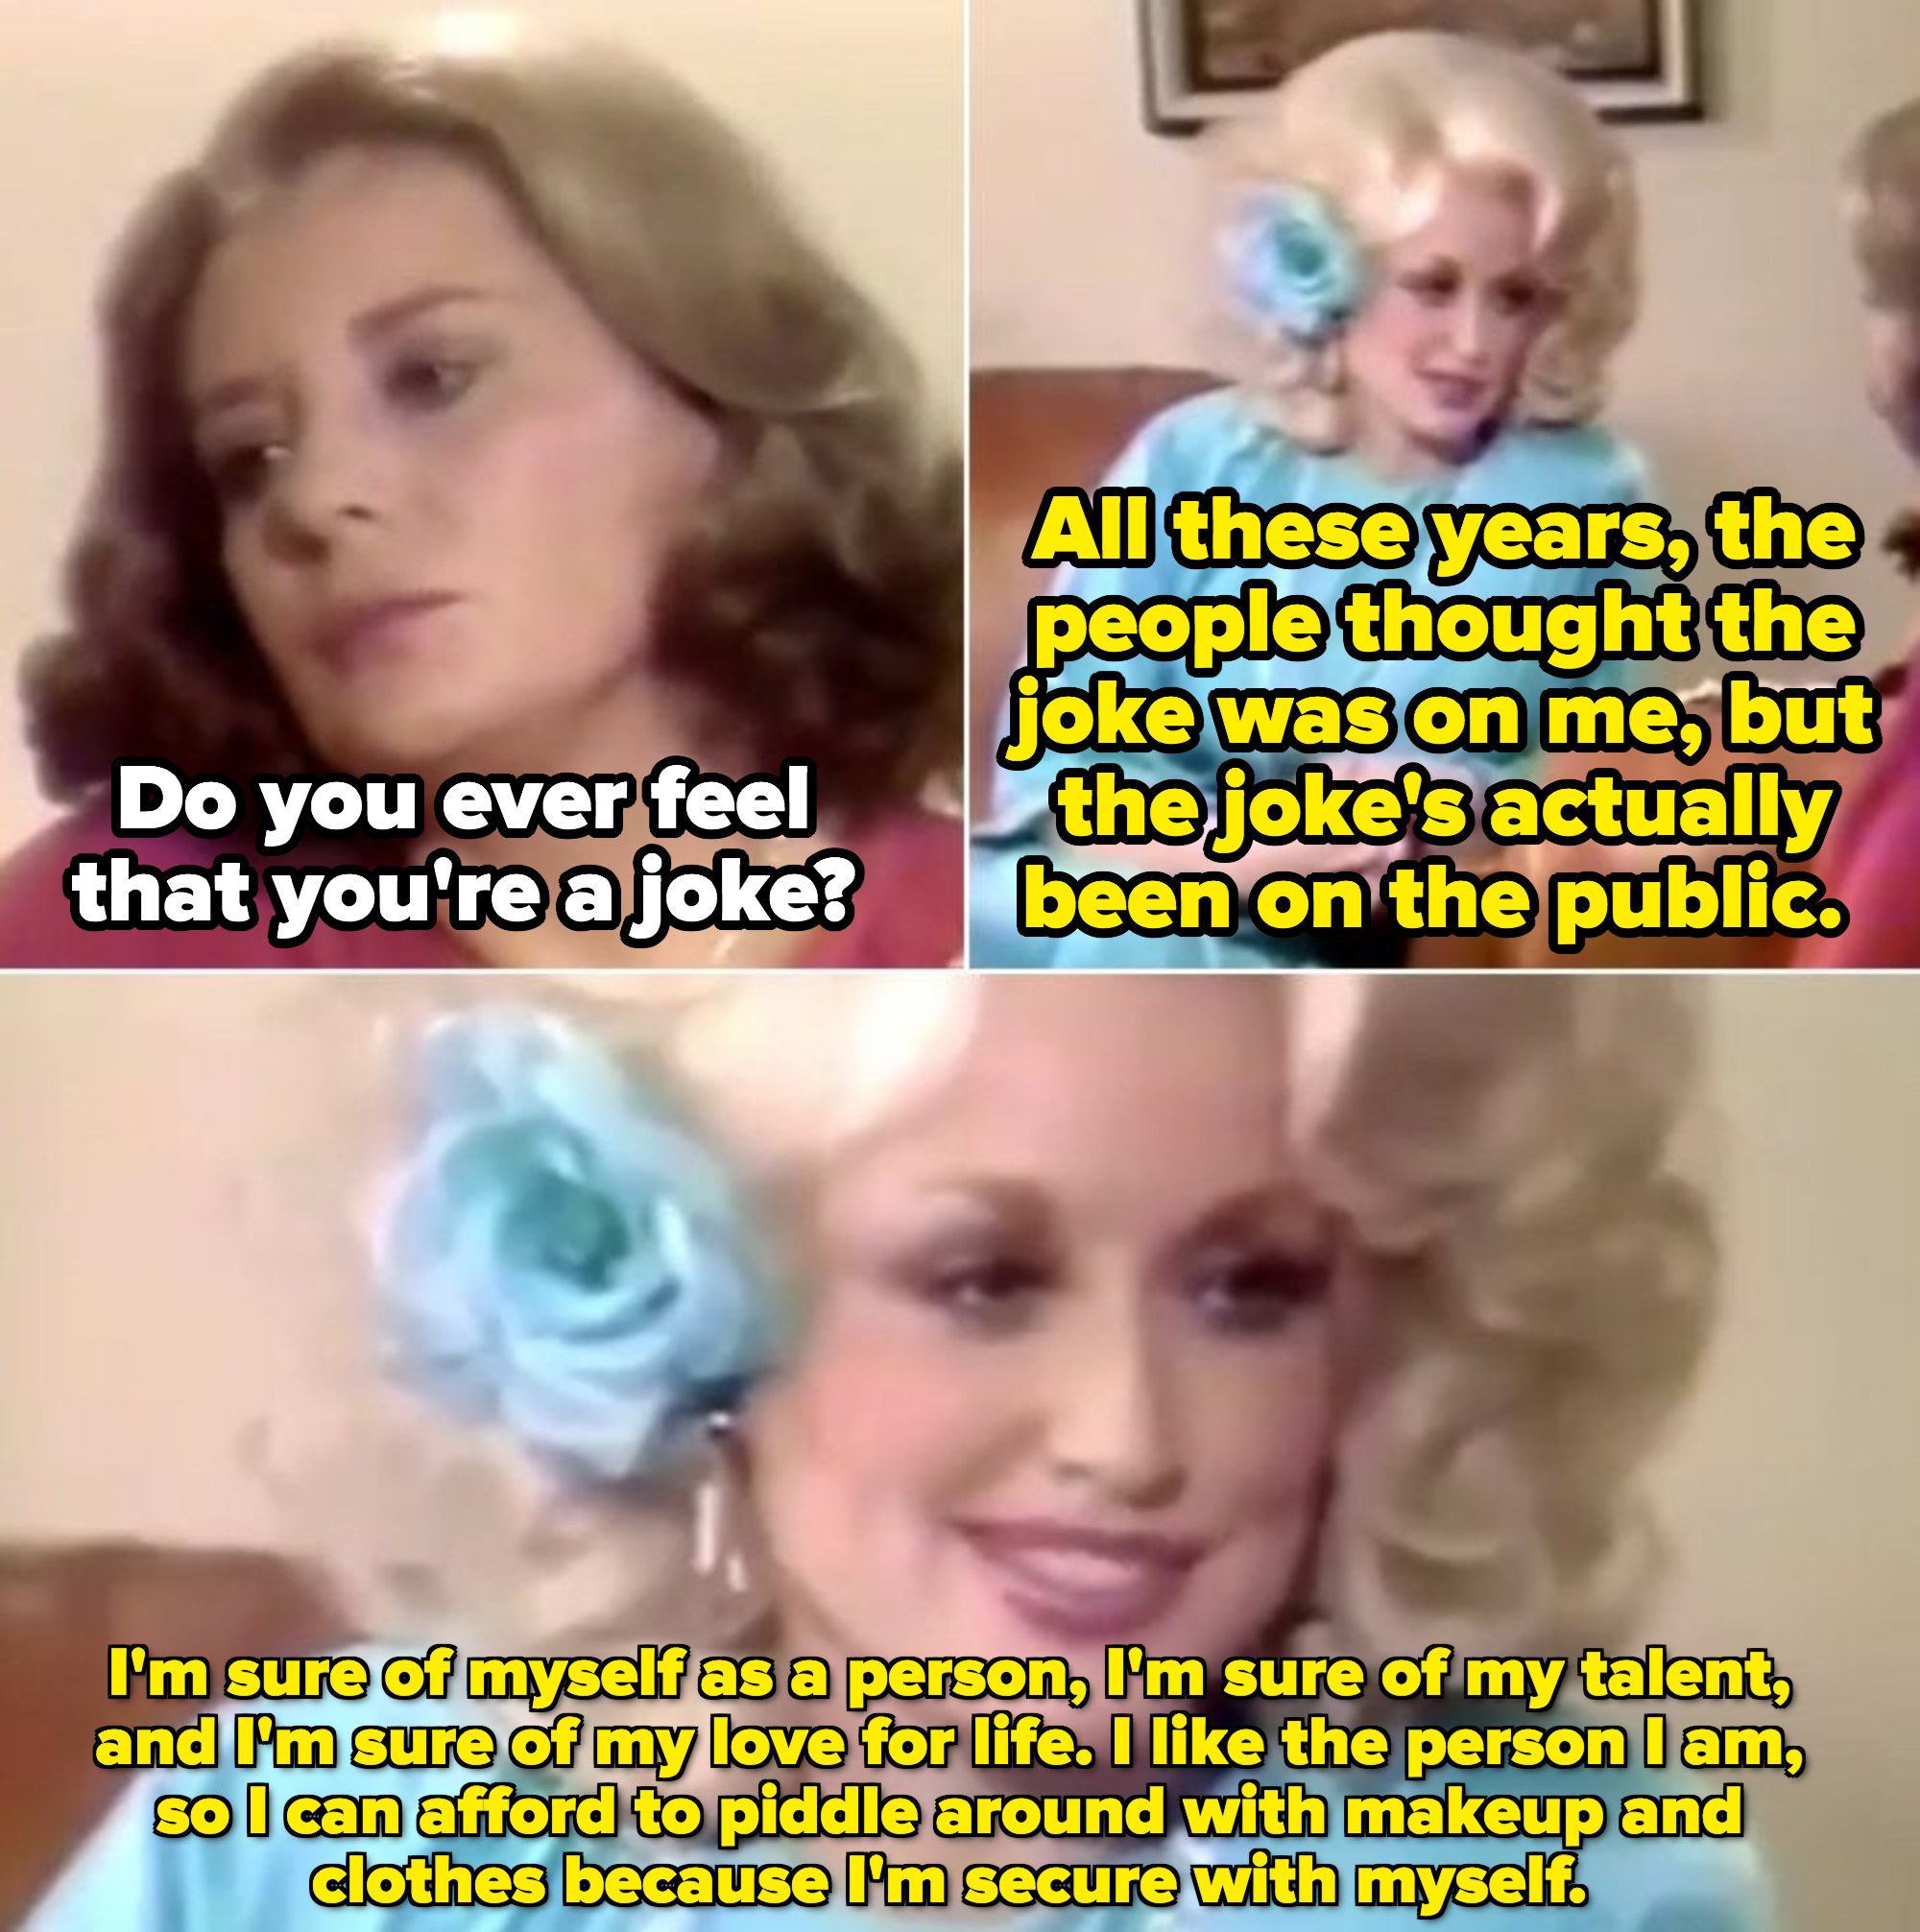 Dolly: &quot;All these years, the people thought the joke was on me, but the joke&#x27;s actually been on the public. I&#x27;m sure of myself as a person. I can piddle around with makeup because I&#x27;m secure with myself&quot;